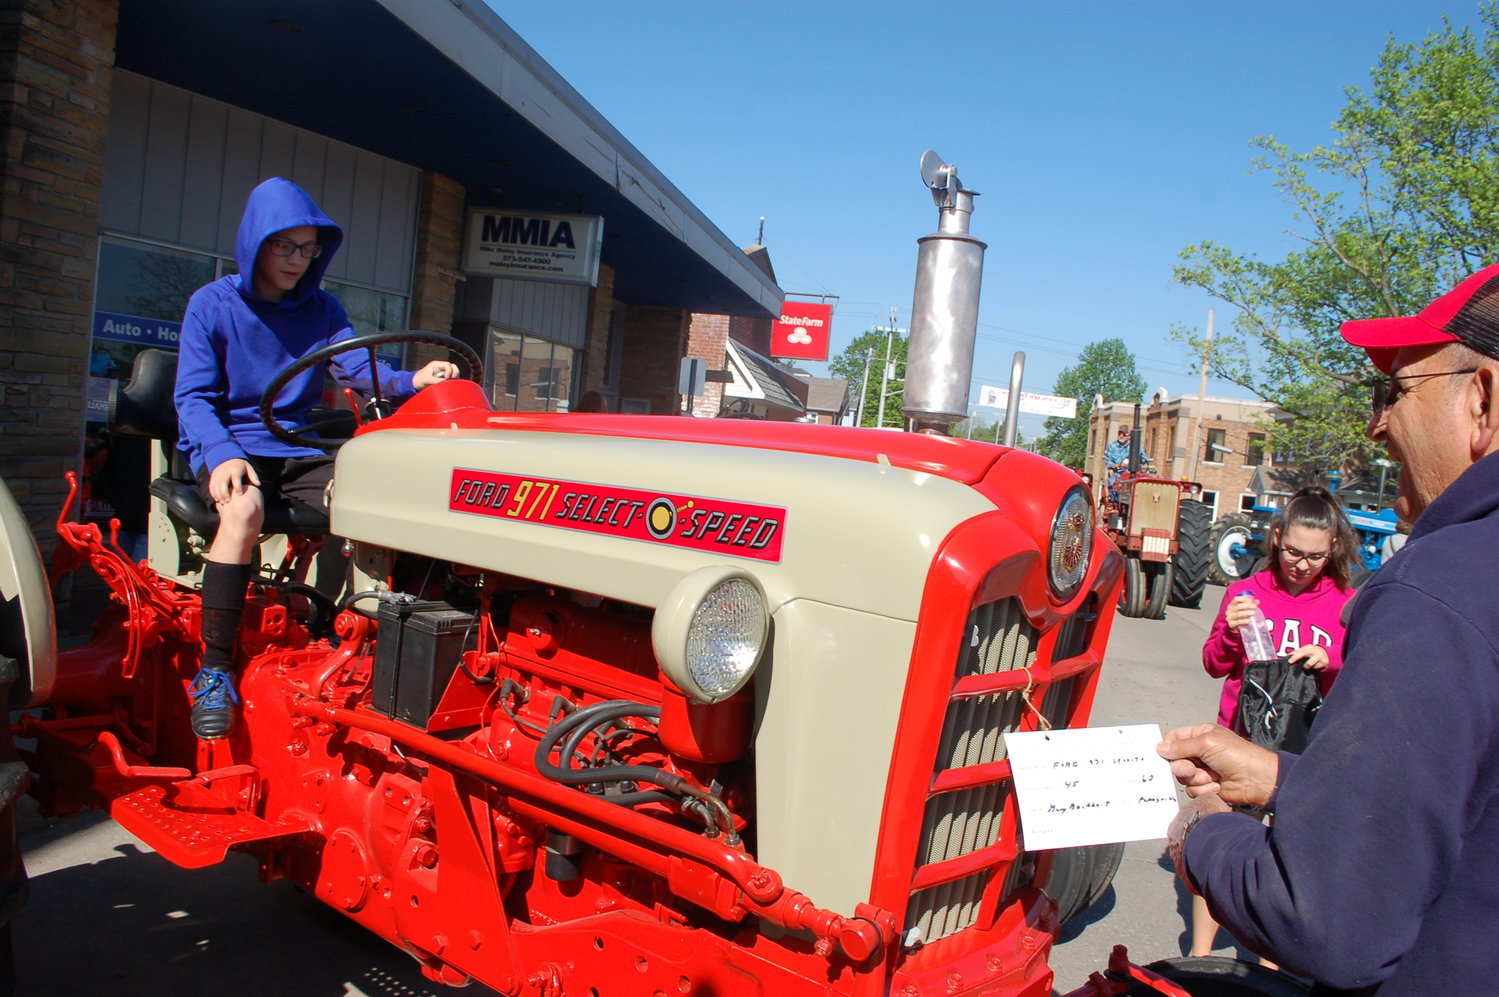 Gary Buchheit, right, of Perryville adjusts the sign on his Ford tractor Saturday morning while (background) another driver brings a tractor to Saturday’s show.